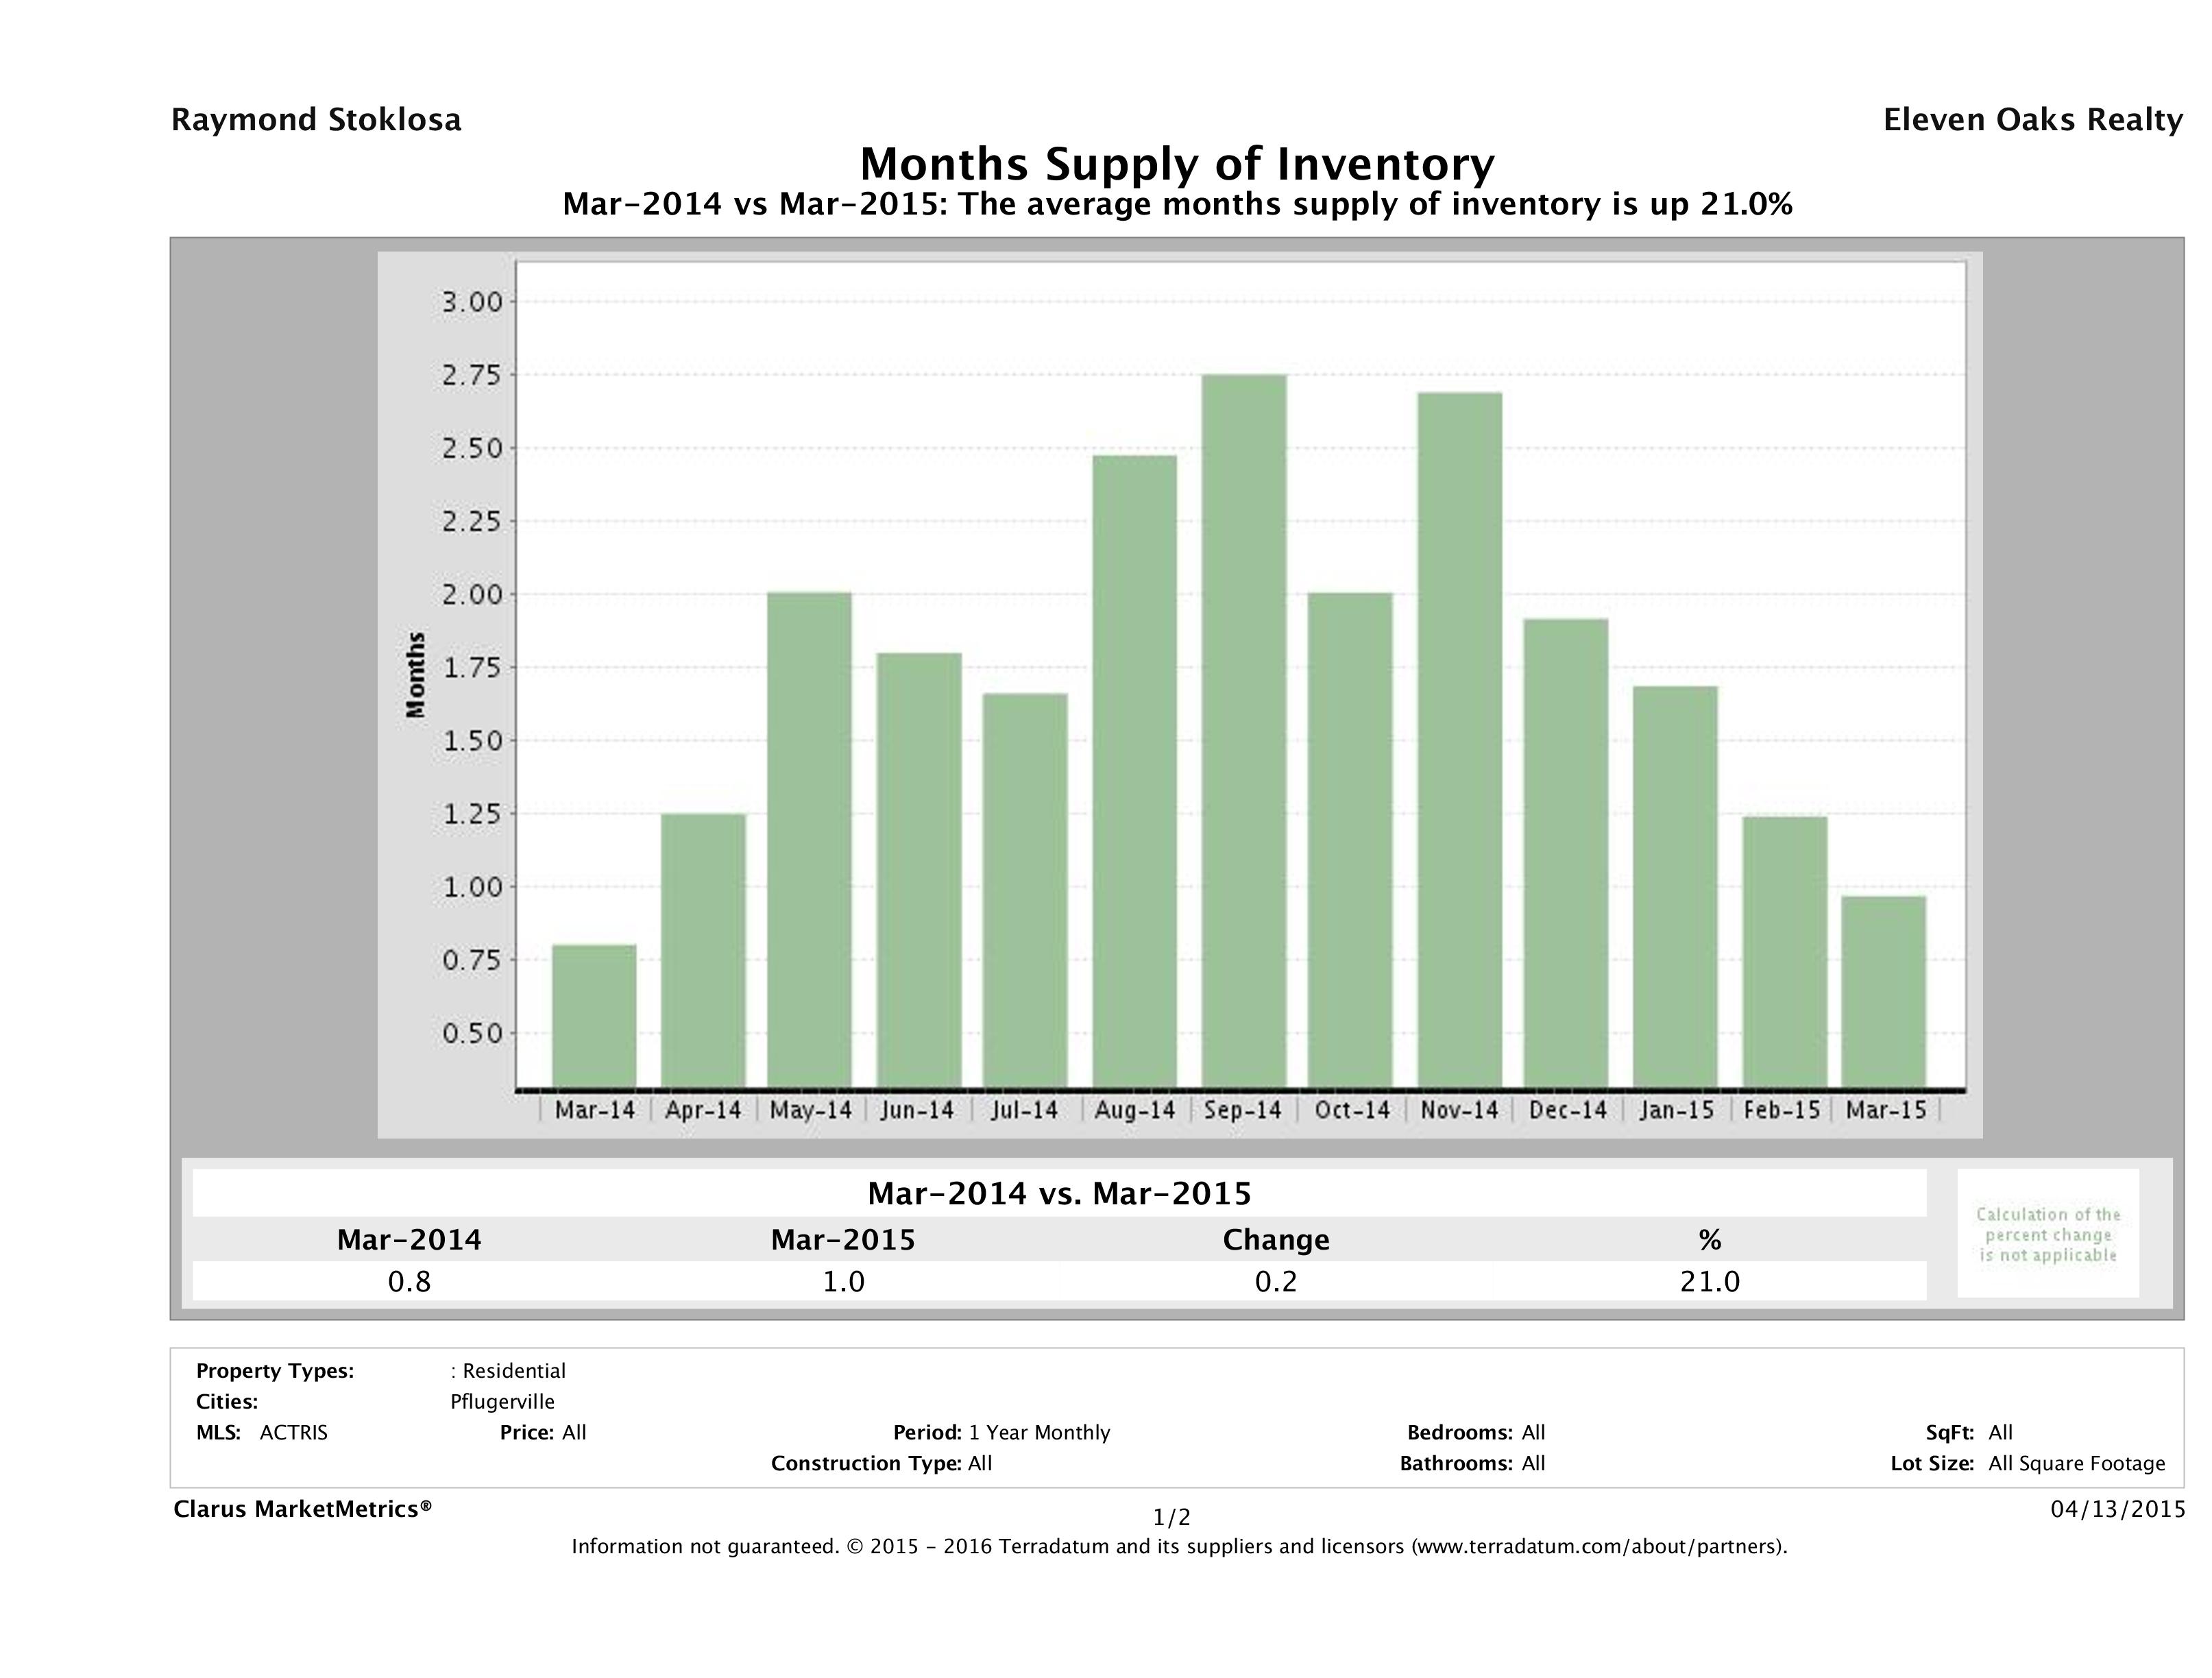 Pflugerville single family home months inventory March 2015